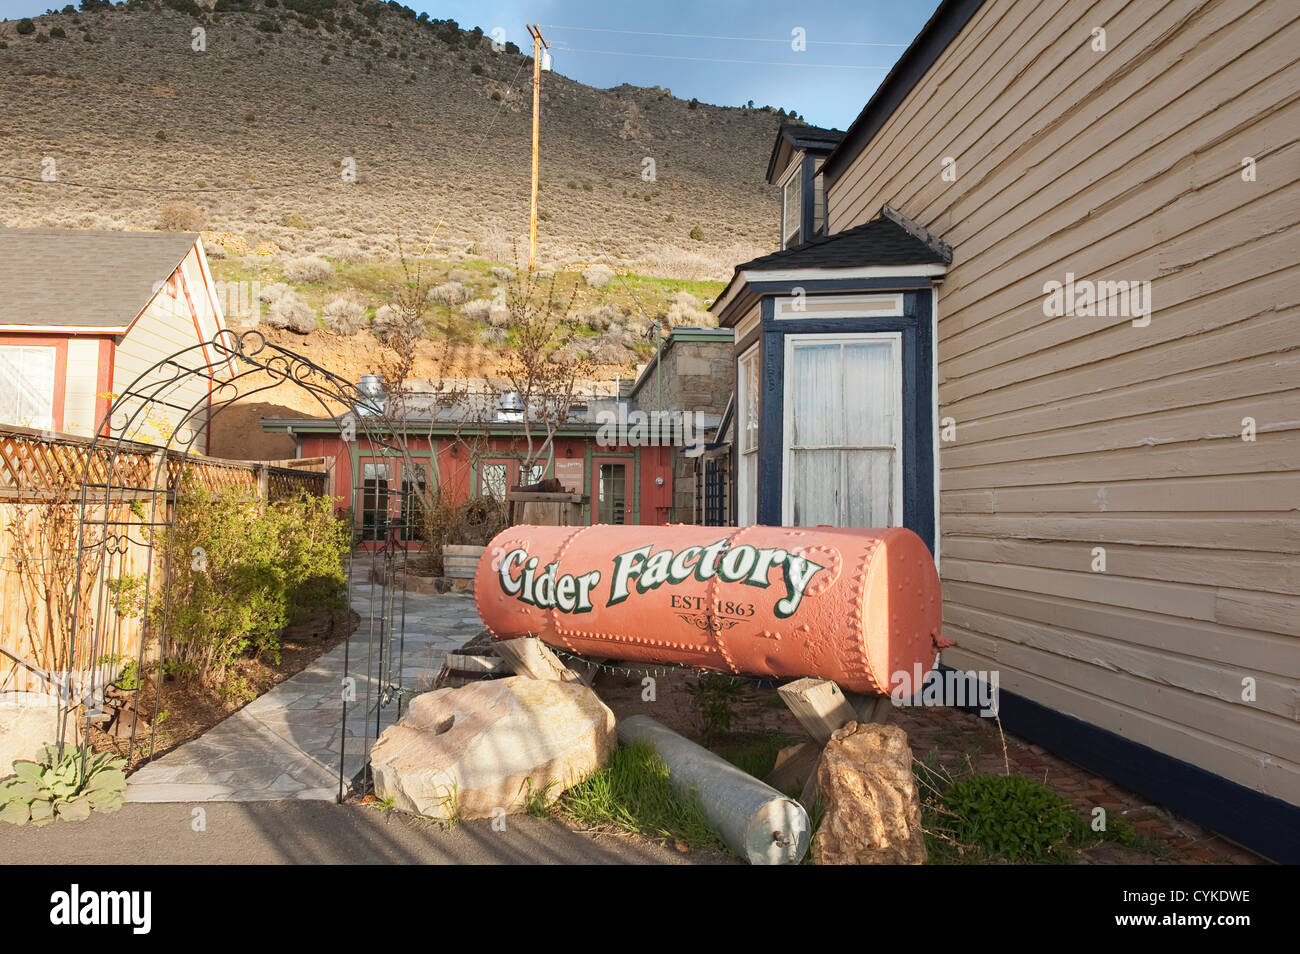 Cider Factory at Edith Palmer's Country Inn, a Victorian home built in 1863, Virginia CIty, Nevada. Stock Photo